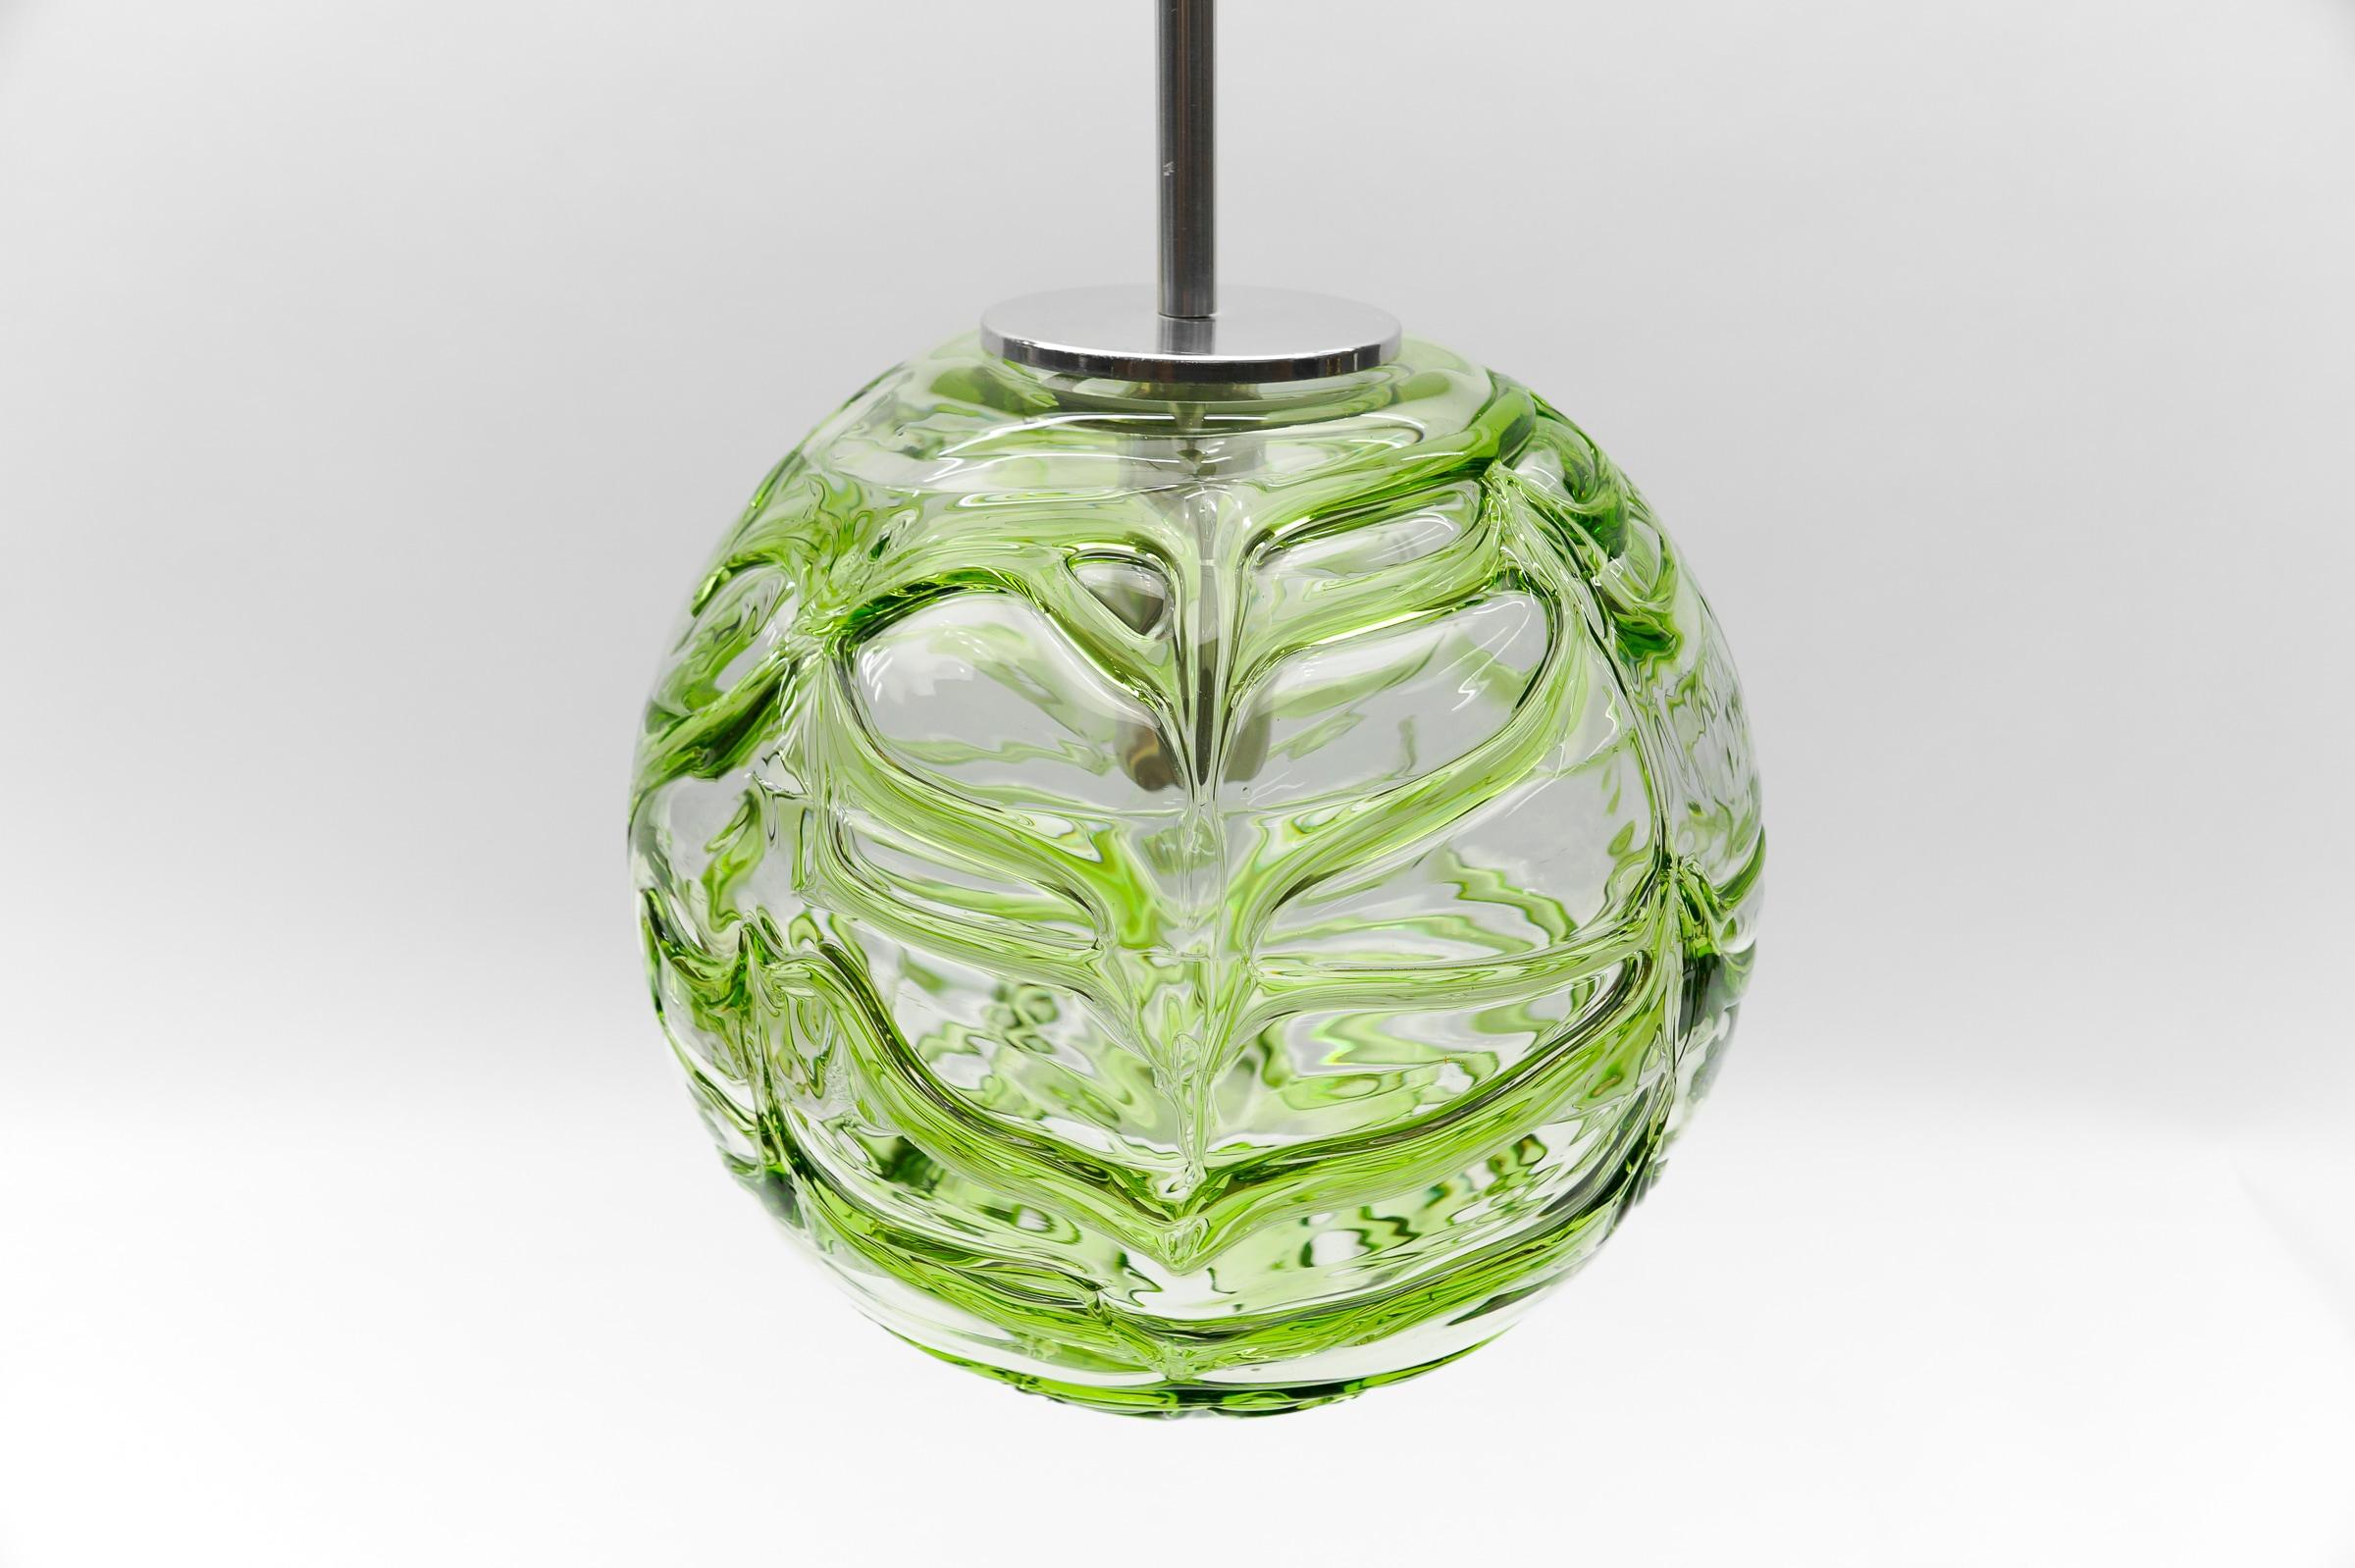 Large Green Murano Glass Ball Pendant Lamp by Doria, - 1960s Germany For Sale 5